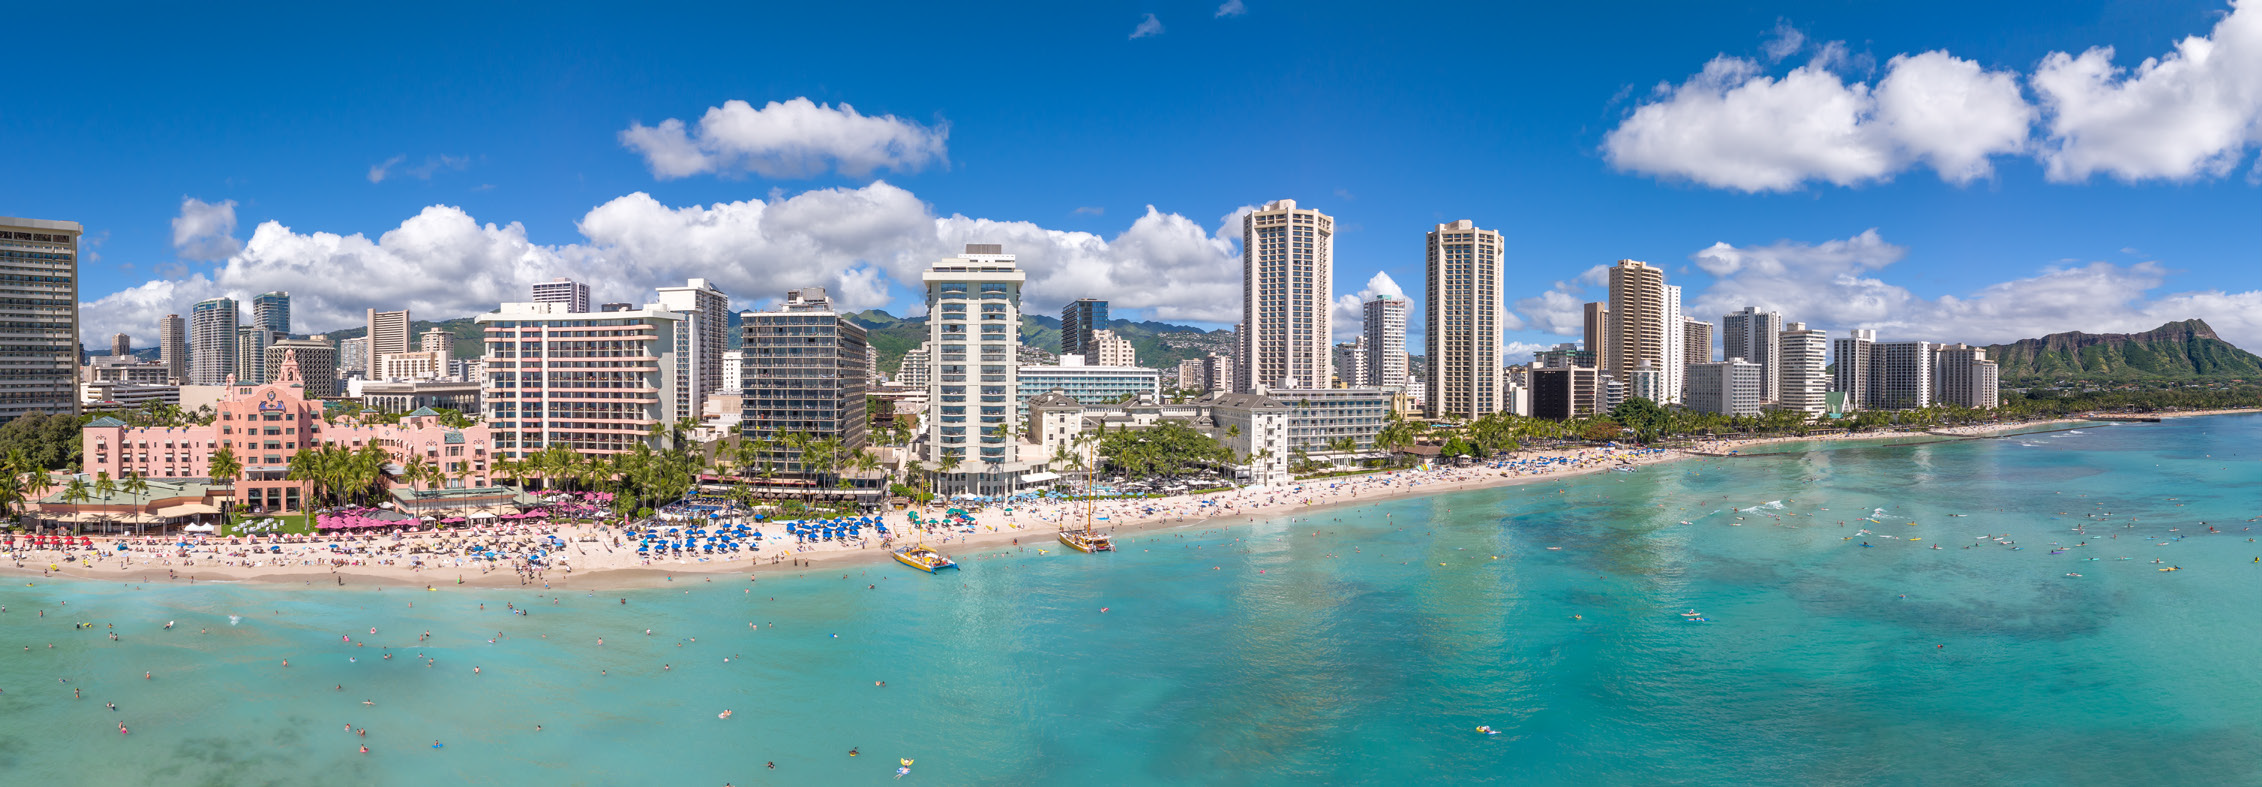 CRITICAL PLANNING FOR SEA LEVEL RISE IN WAIKĪKĪ and SHORELINE RESORT PROPERTIES│G70 & Sea Engineering, Inc.